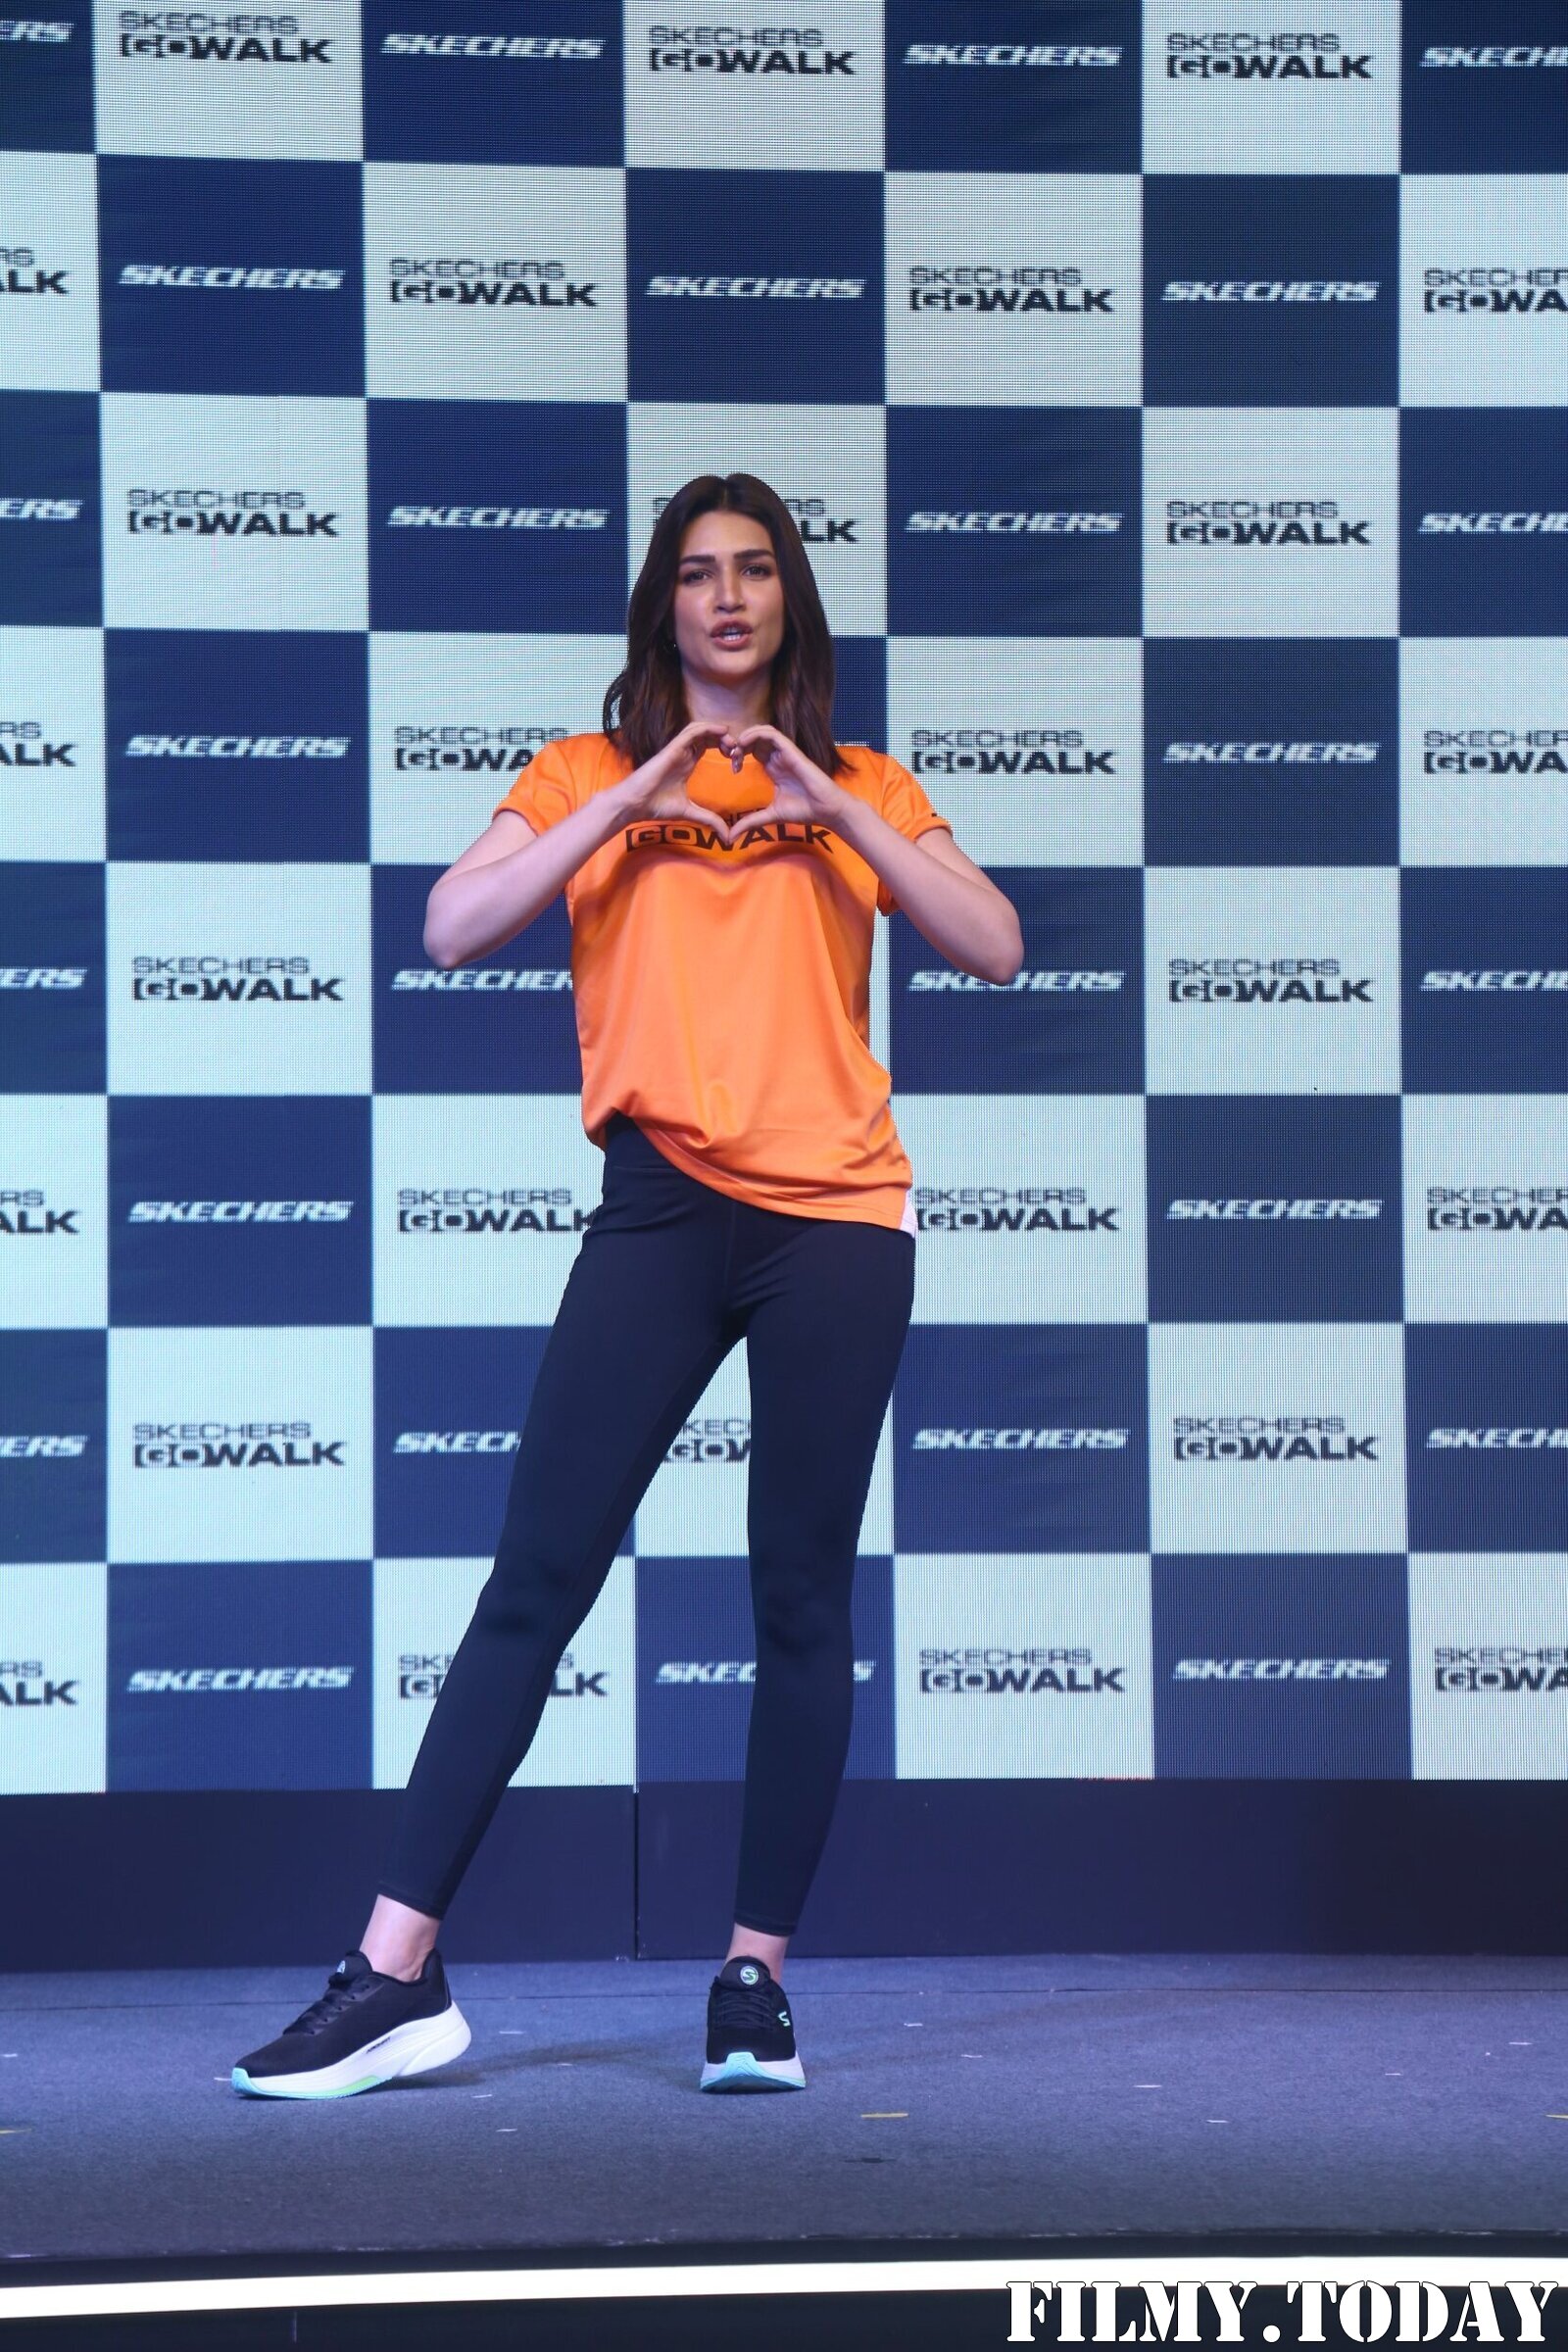 Photos: Kriti Sanon At The Press Conference Of 4th Edition Of The Skechers Walkathon | Picture 1940188